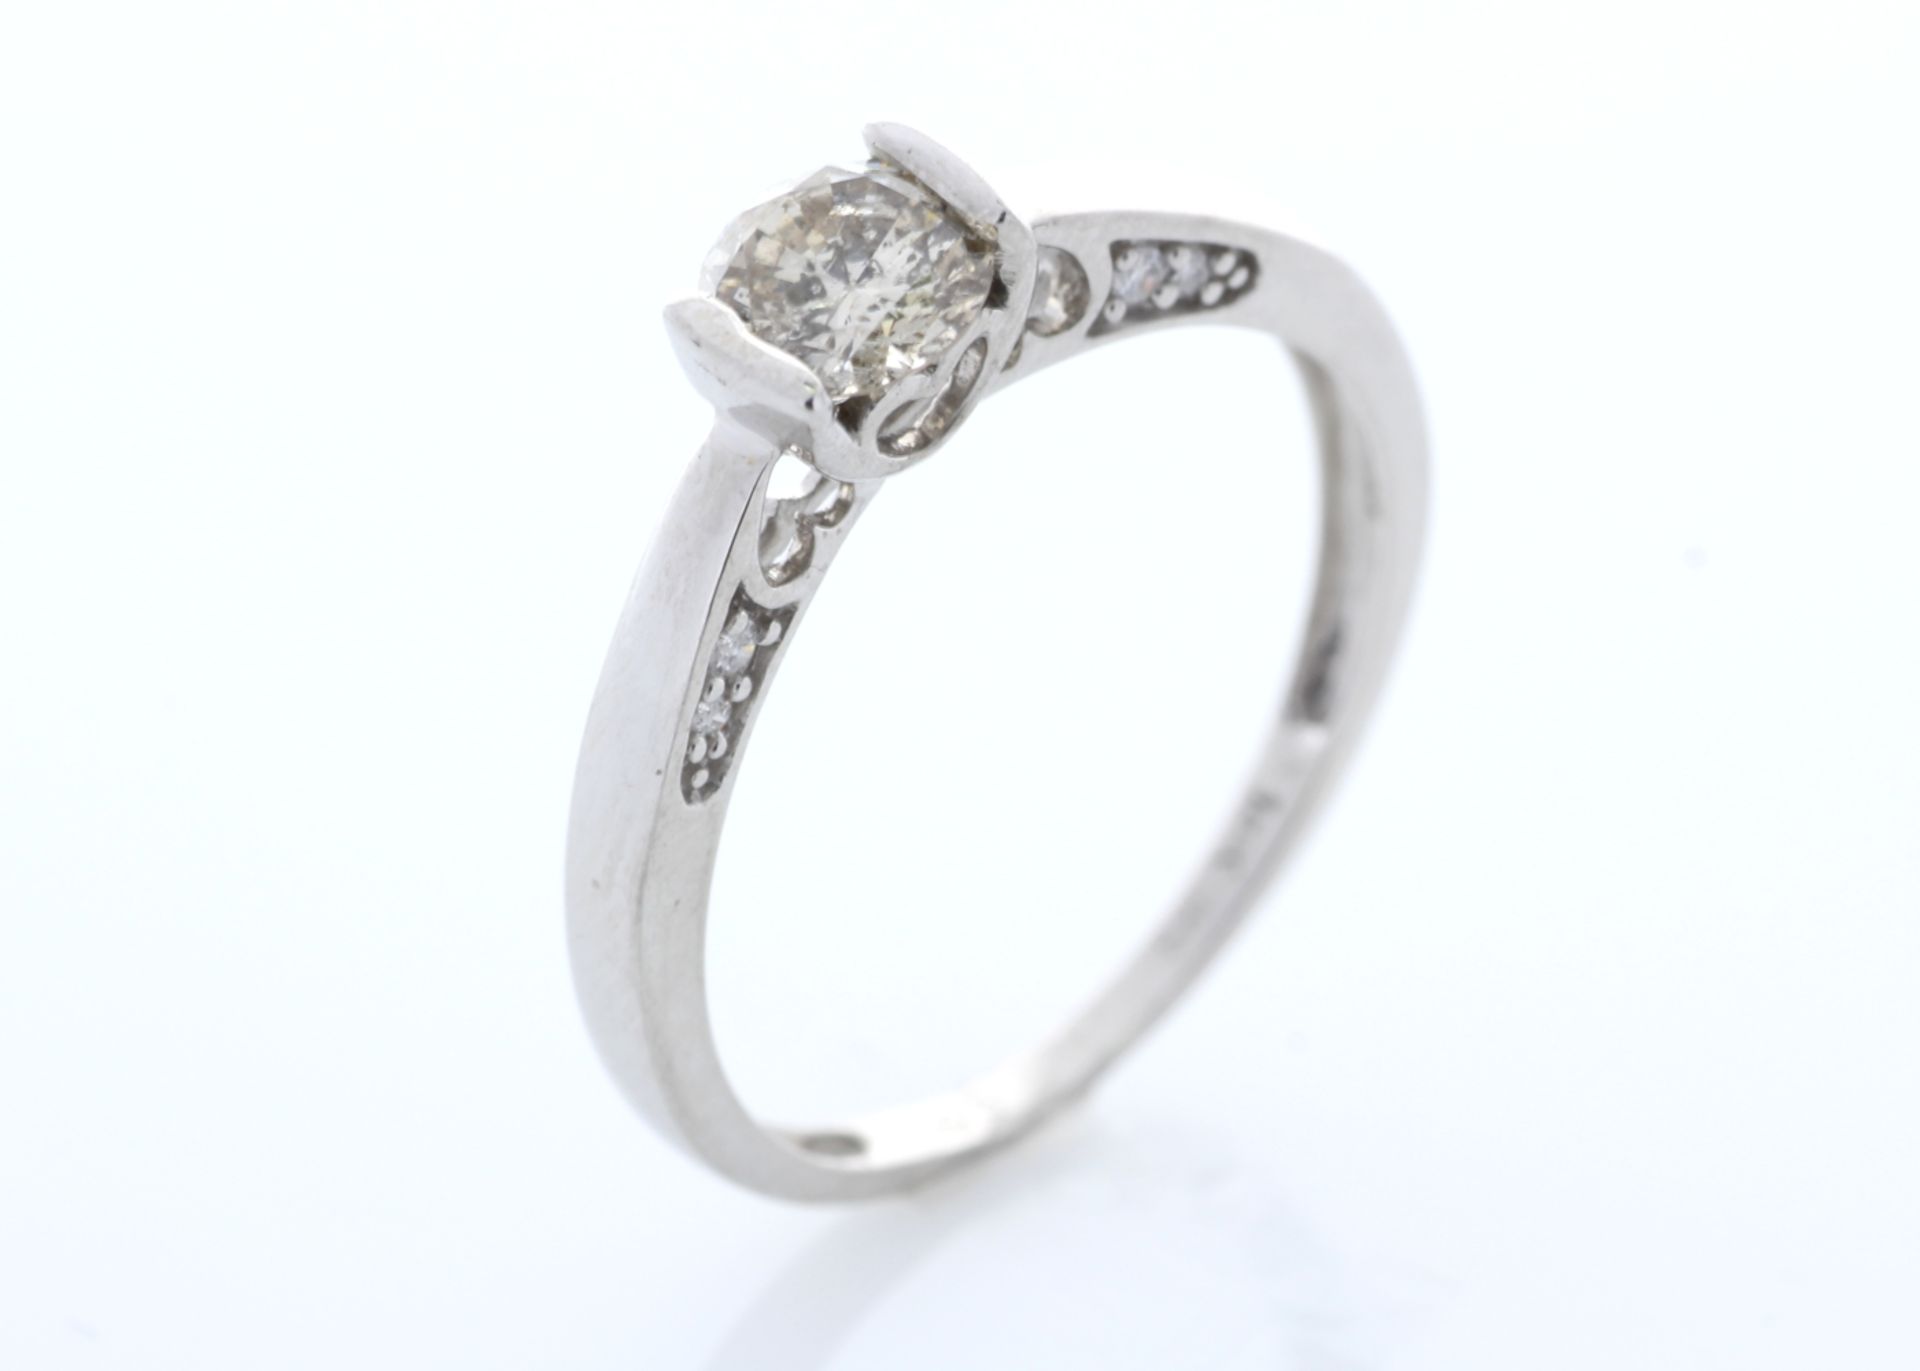 18ct White Gold Single Stone Prong Set With Stone Set Shoulders Diamond Ring 0.60 Carats - Valued by